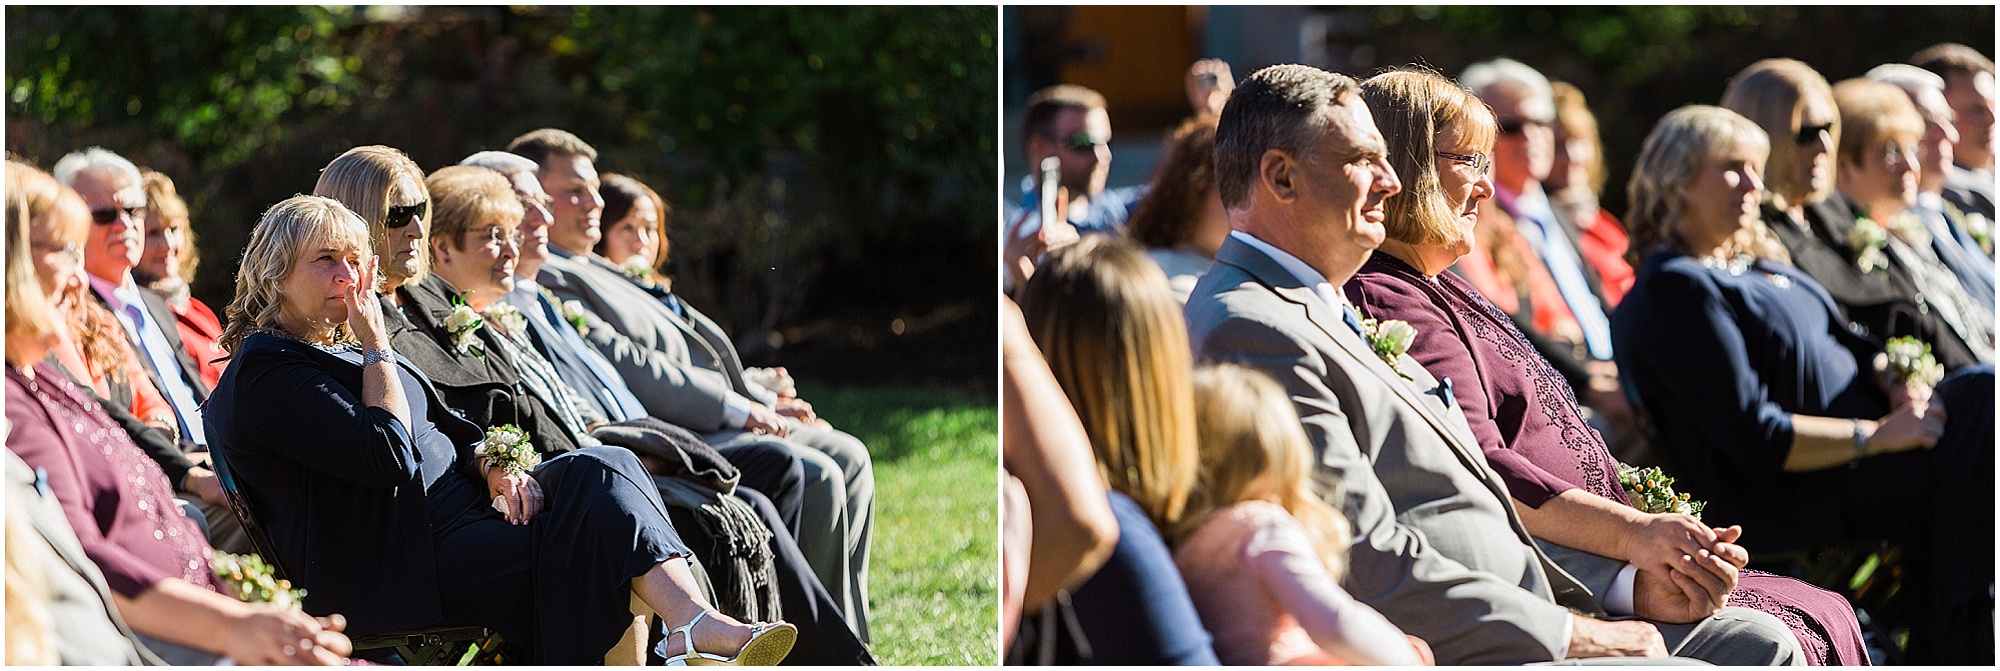 The family of the bride and groom look on as their children marry at this beautiful outdoor ceremony in the fall at Hollinshead Barn in Bend, OR. | Erica Swantek Photography